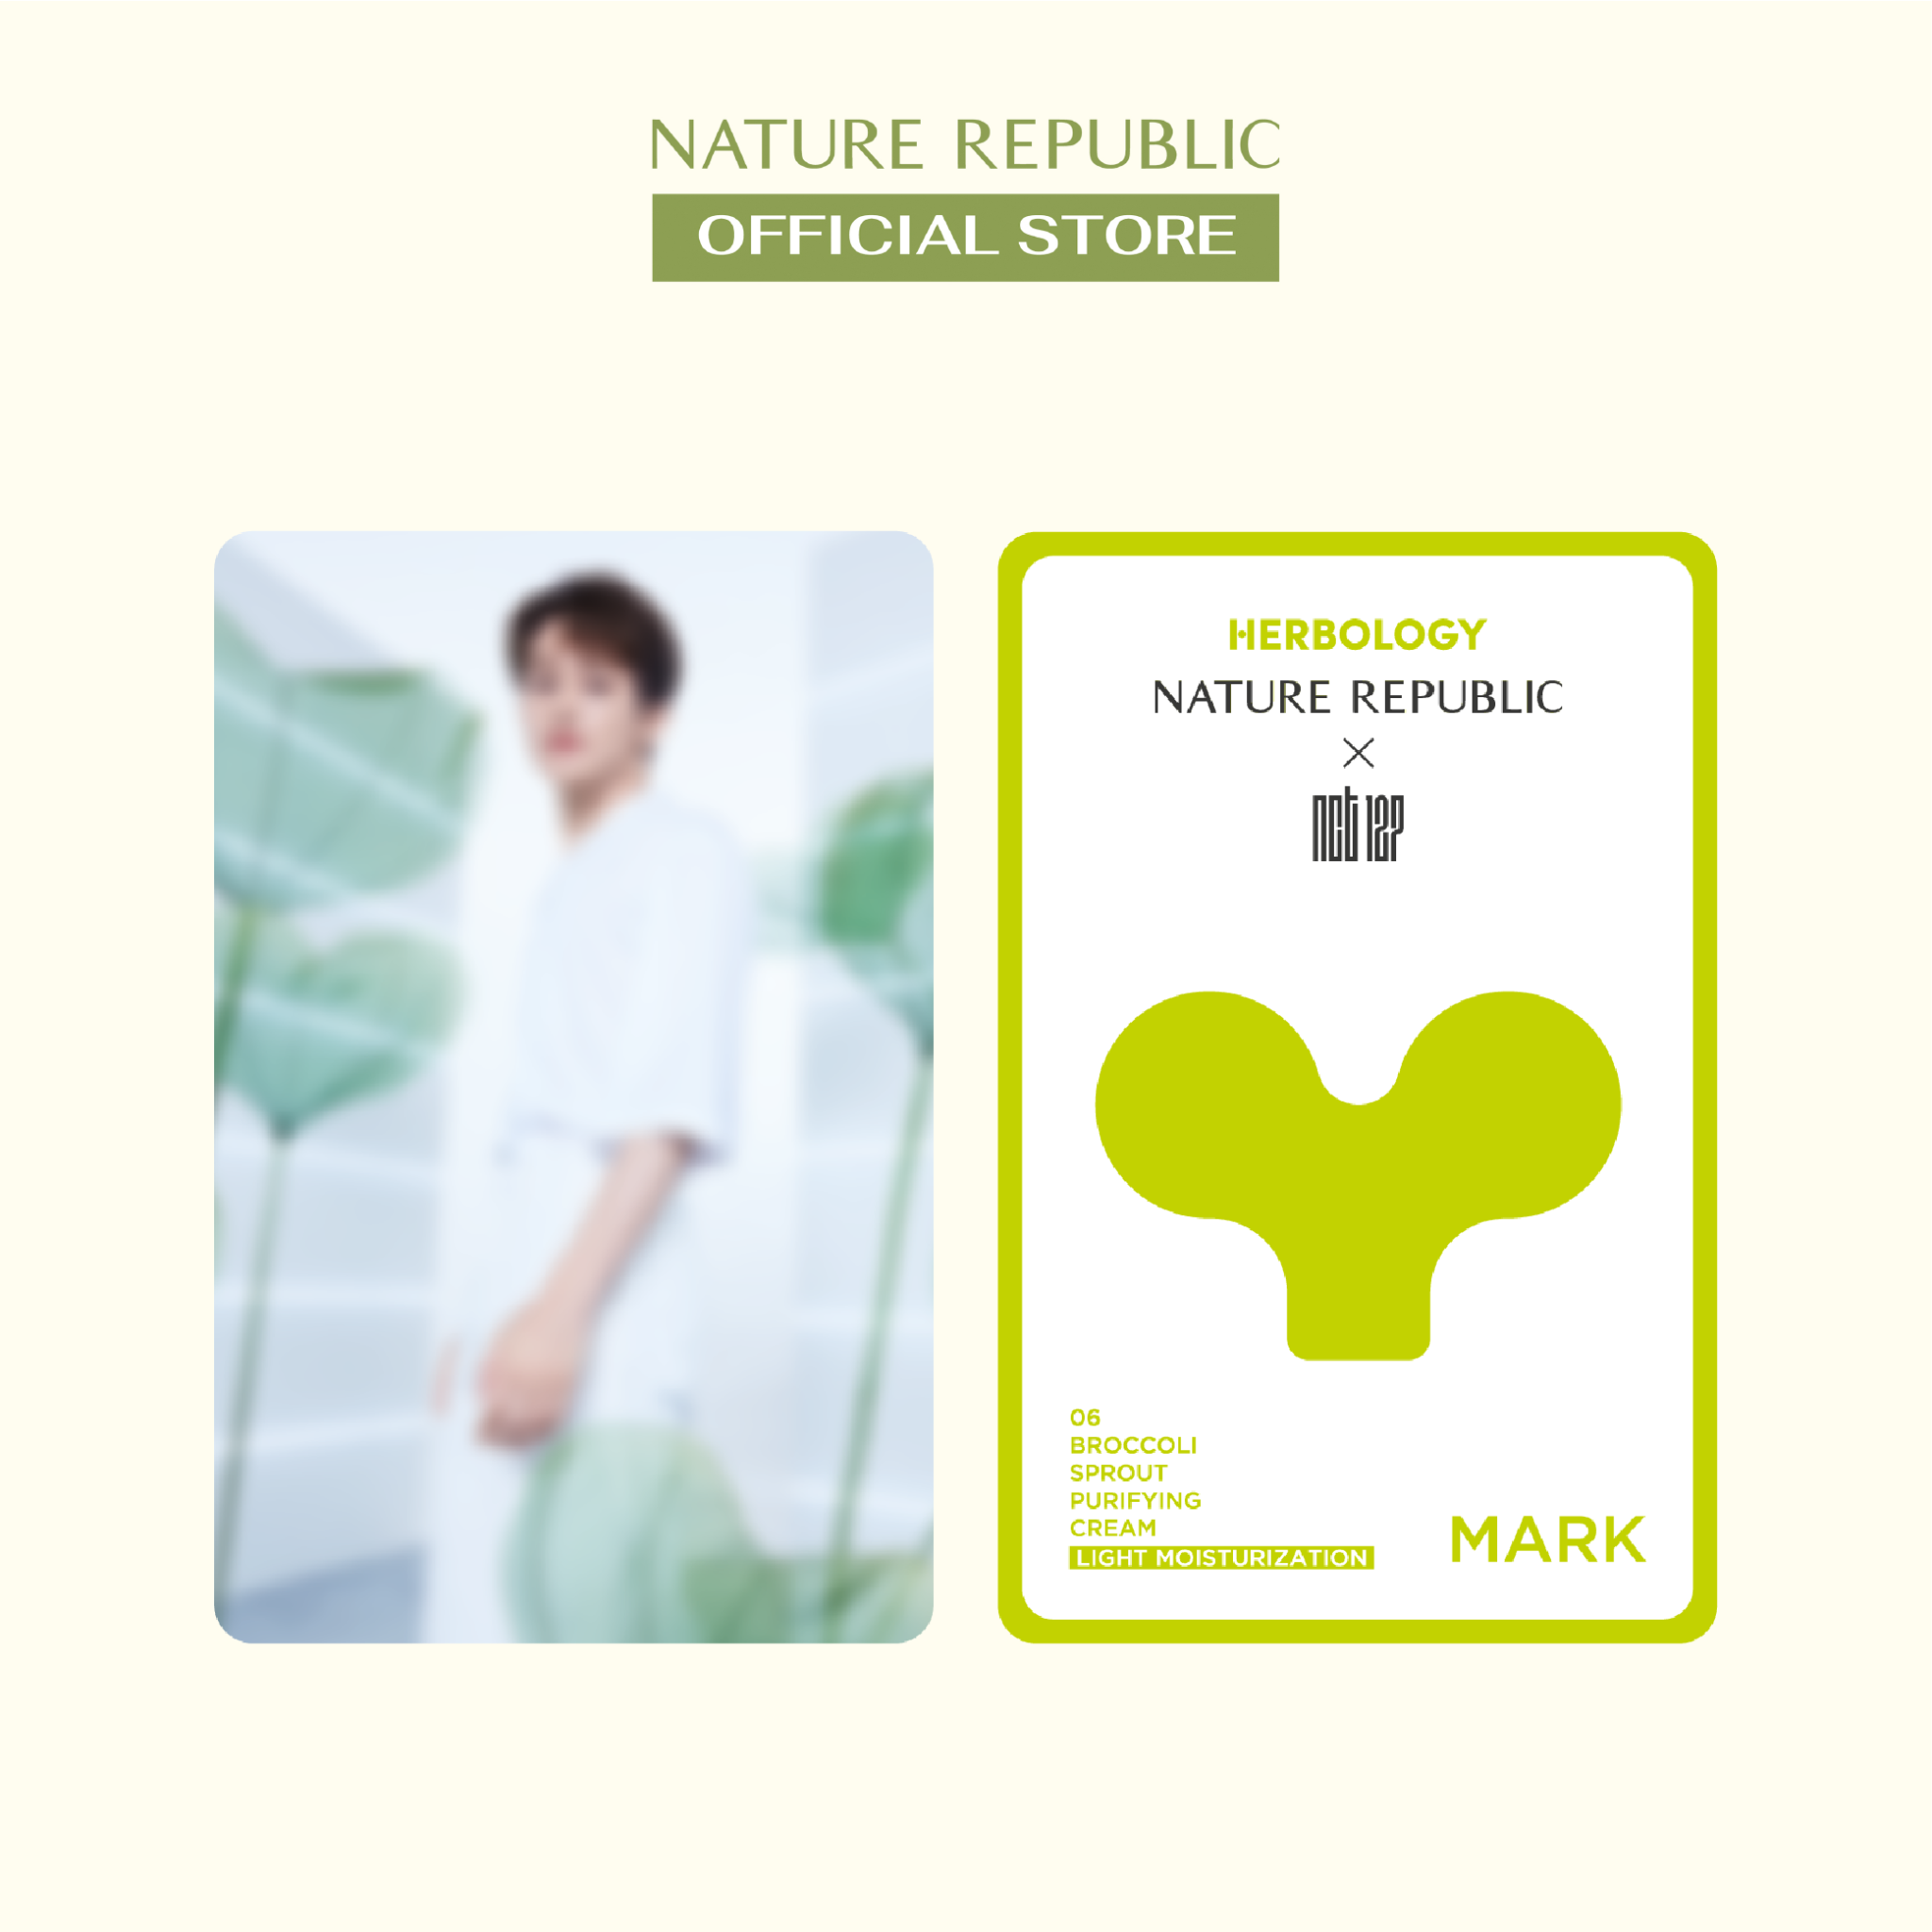  [Nature Republic x NCT127] HERBOLOGY Photocard - MARK 